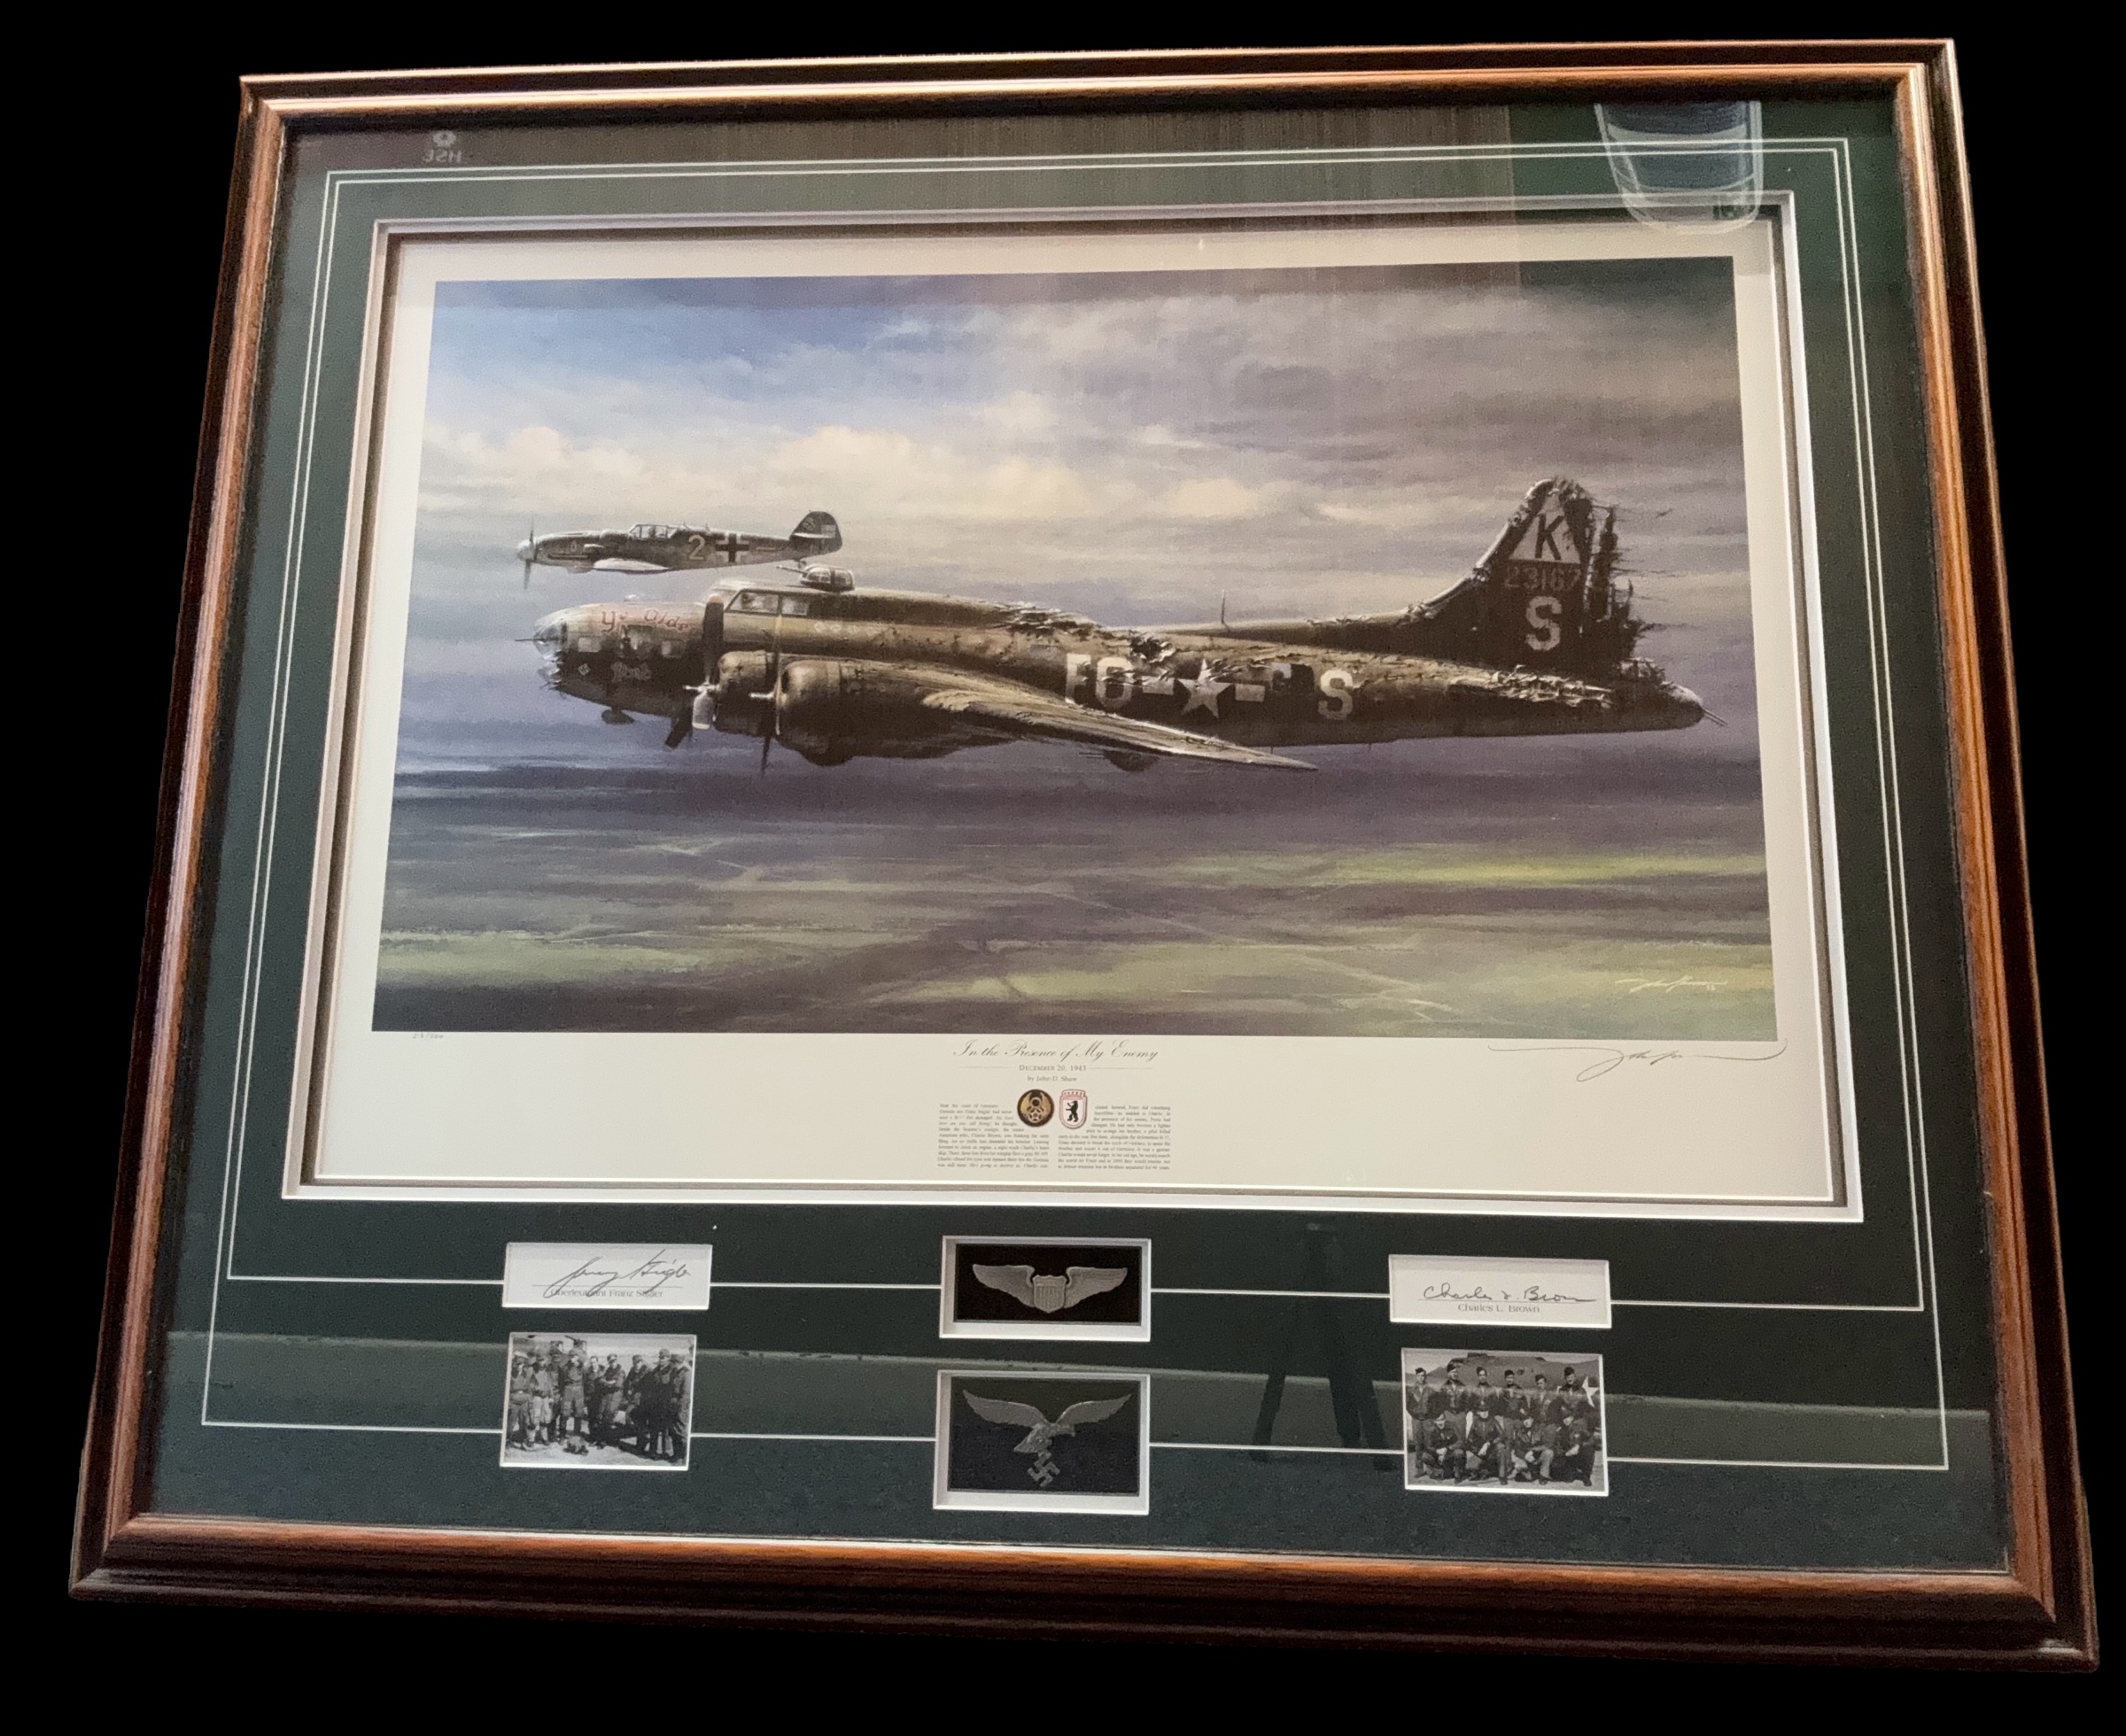 WW 2 Print titled IN THE PRESENCE OF MY ENEMY - FRAMED COLLECTOR'S PIECE by John D Limited 218/ - Image 3 of 3